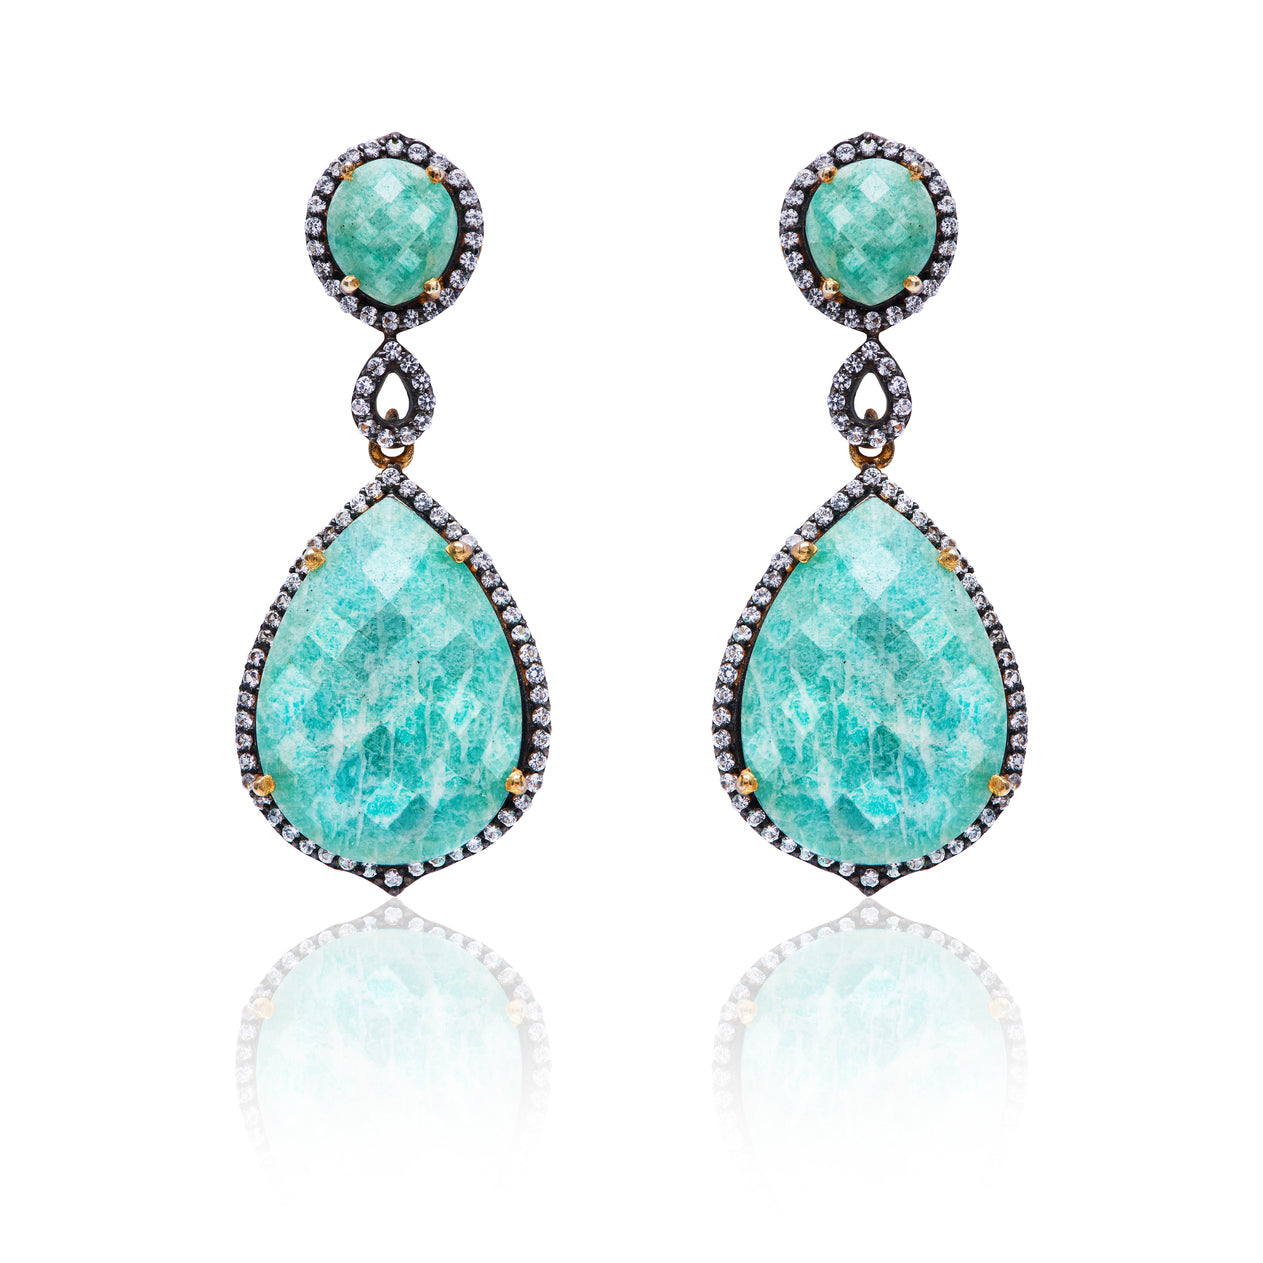 Faceted Amazonite White Topaz Statement Earrings